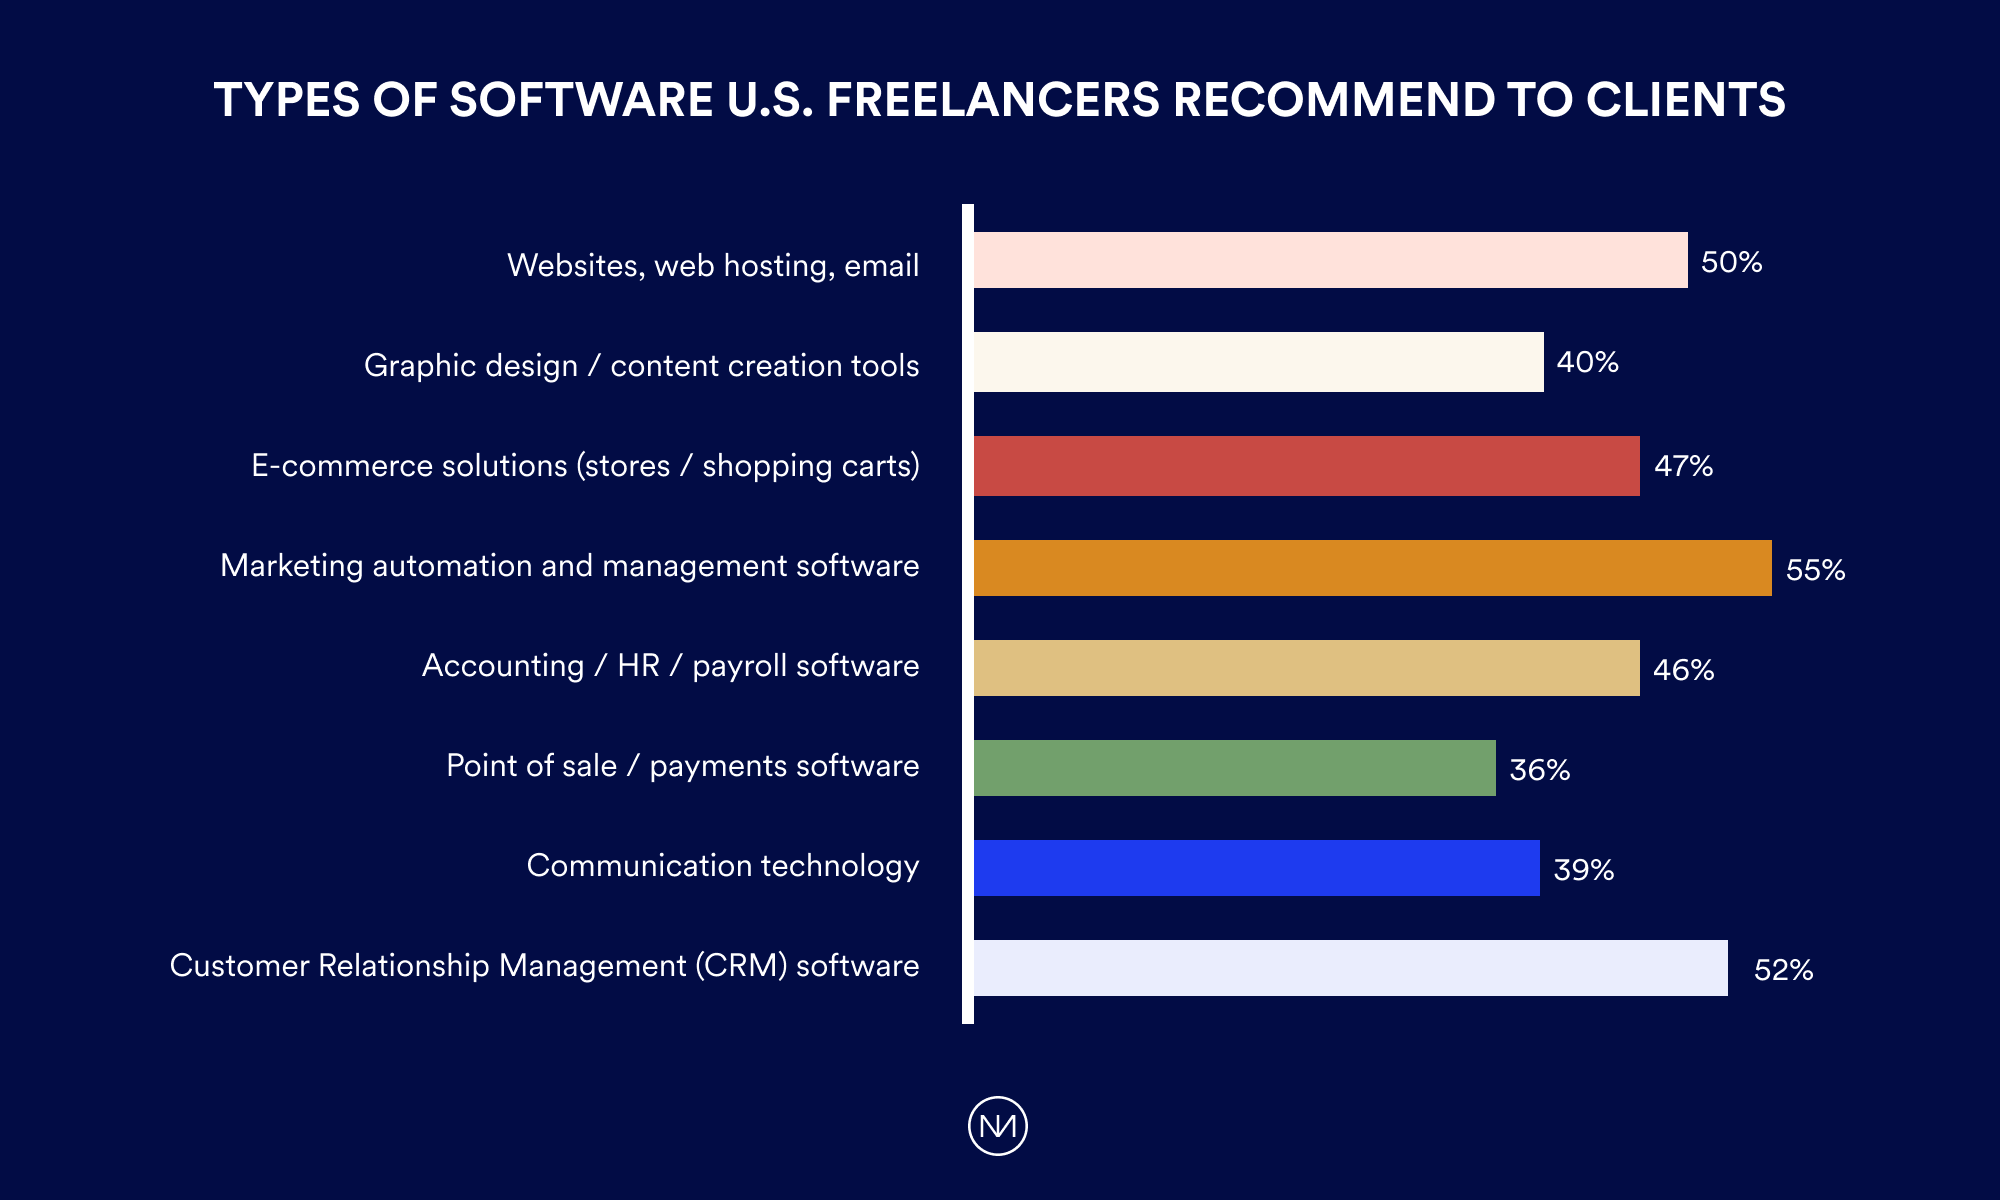 Types of software U.S. freelancers recommend to clients